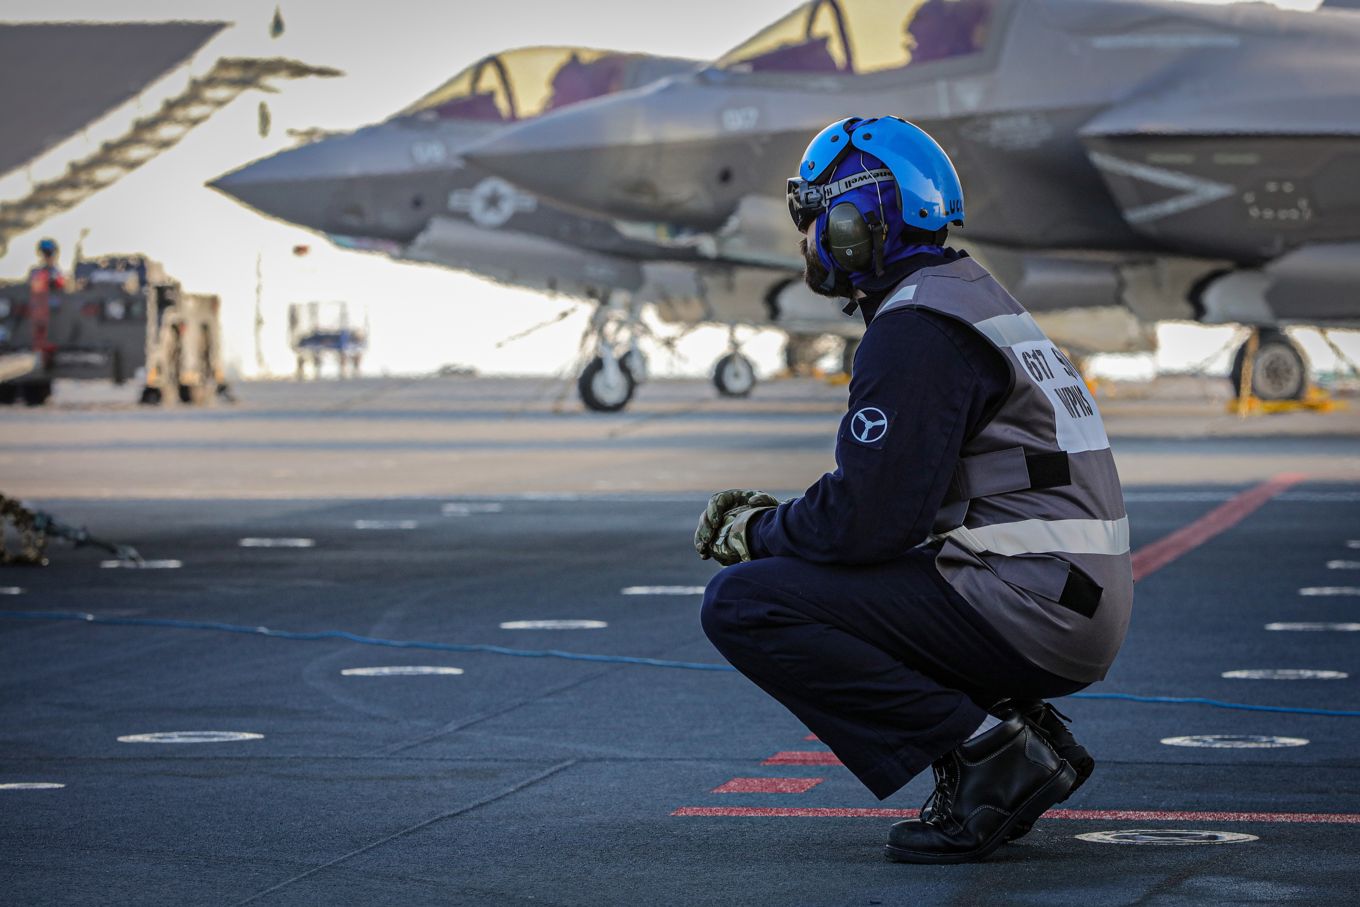 Image shows Royal Navy personnel with F35 aircraft in the background.